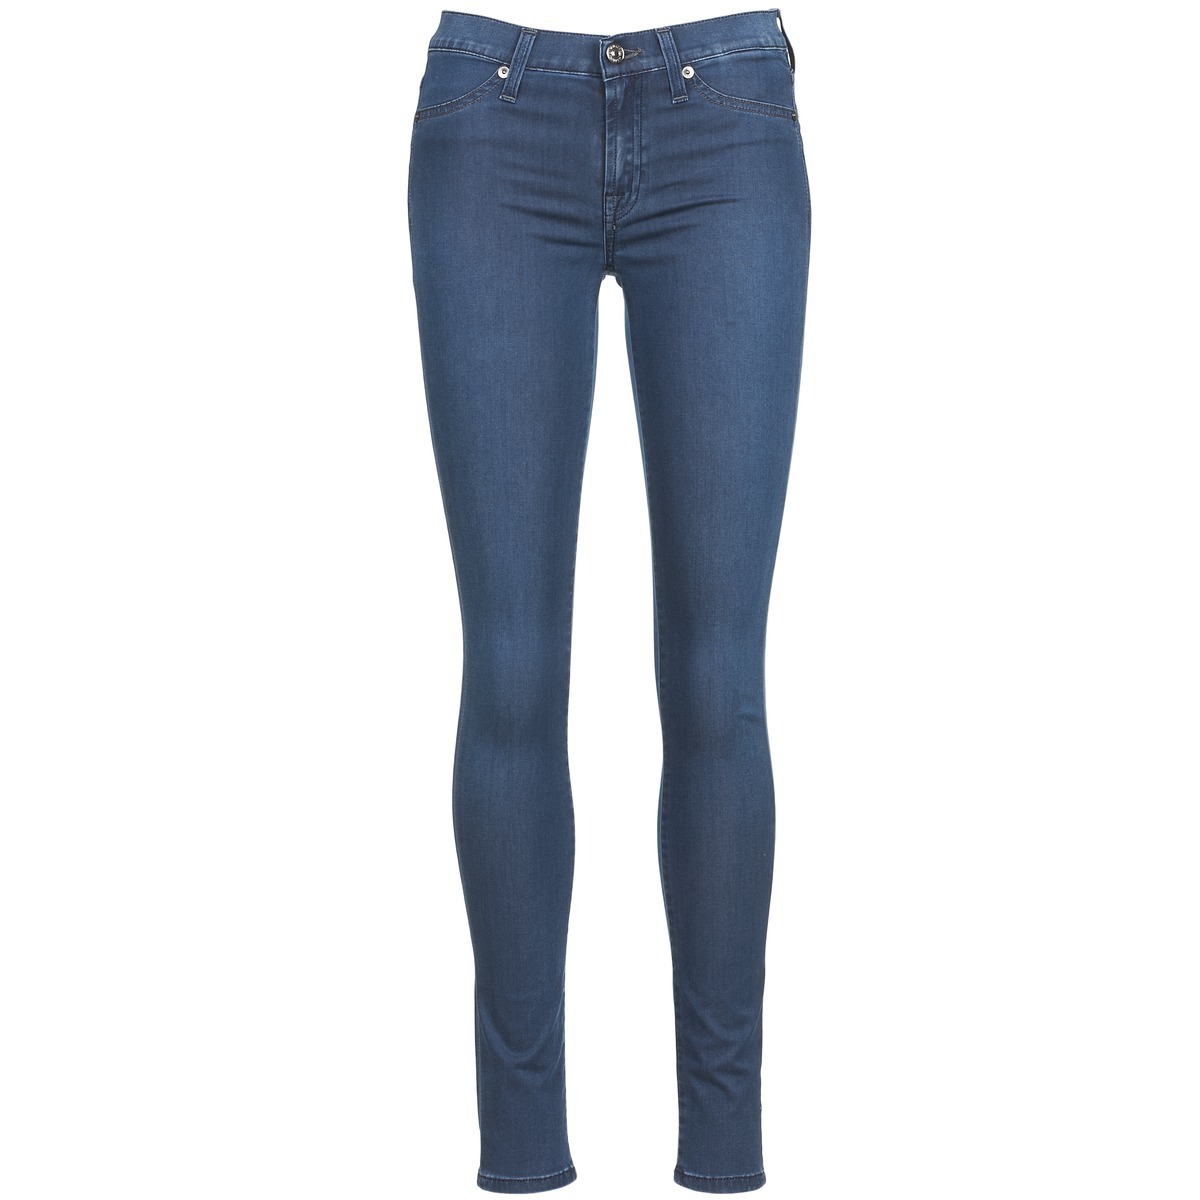 Womens Skinny Jeans - Blue - Spartoo - 7 For All Mankind GOOFASH